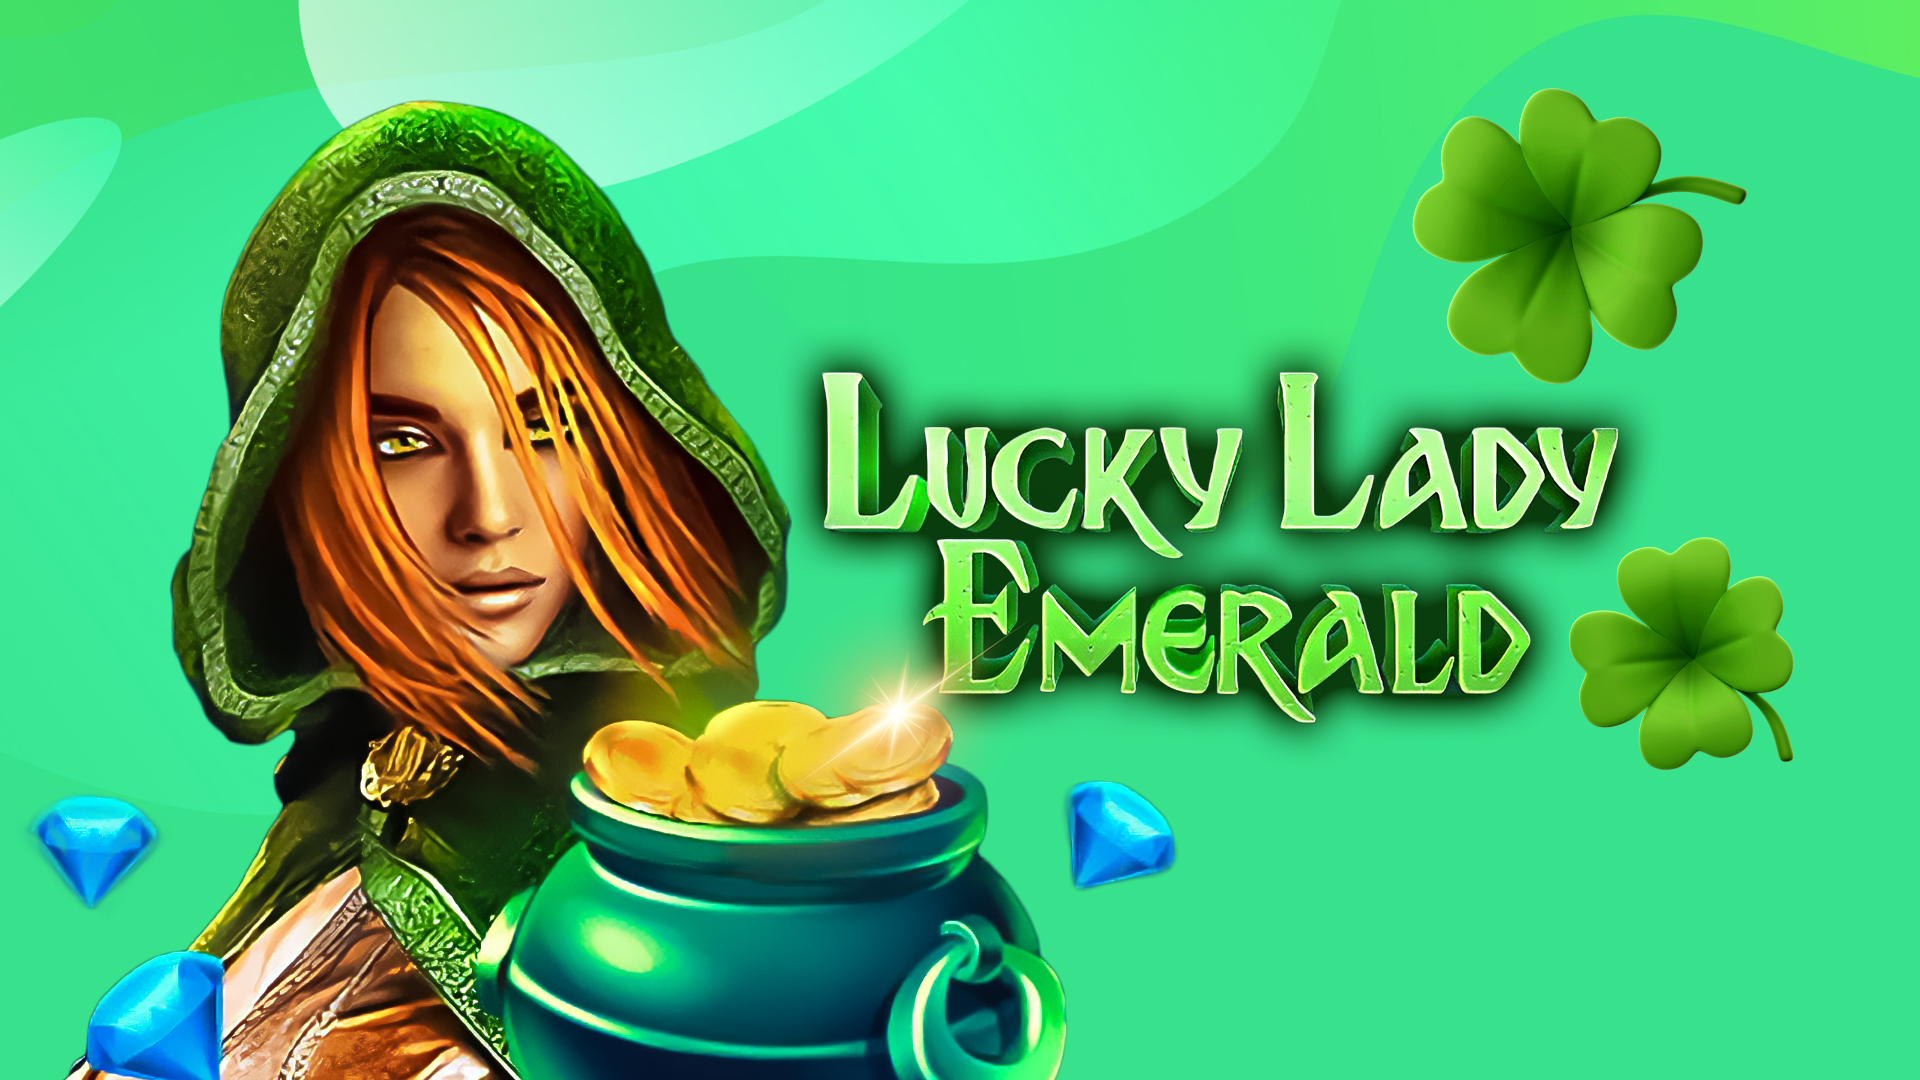 A mysterious woman in a green hood looks at a pot of gold next to text that reads ‘Lucky Lady Emerald’ and it’s all over a green background